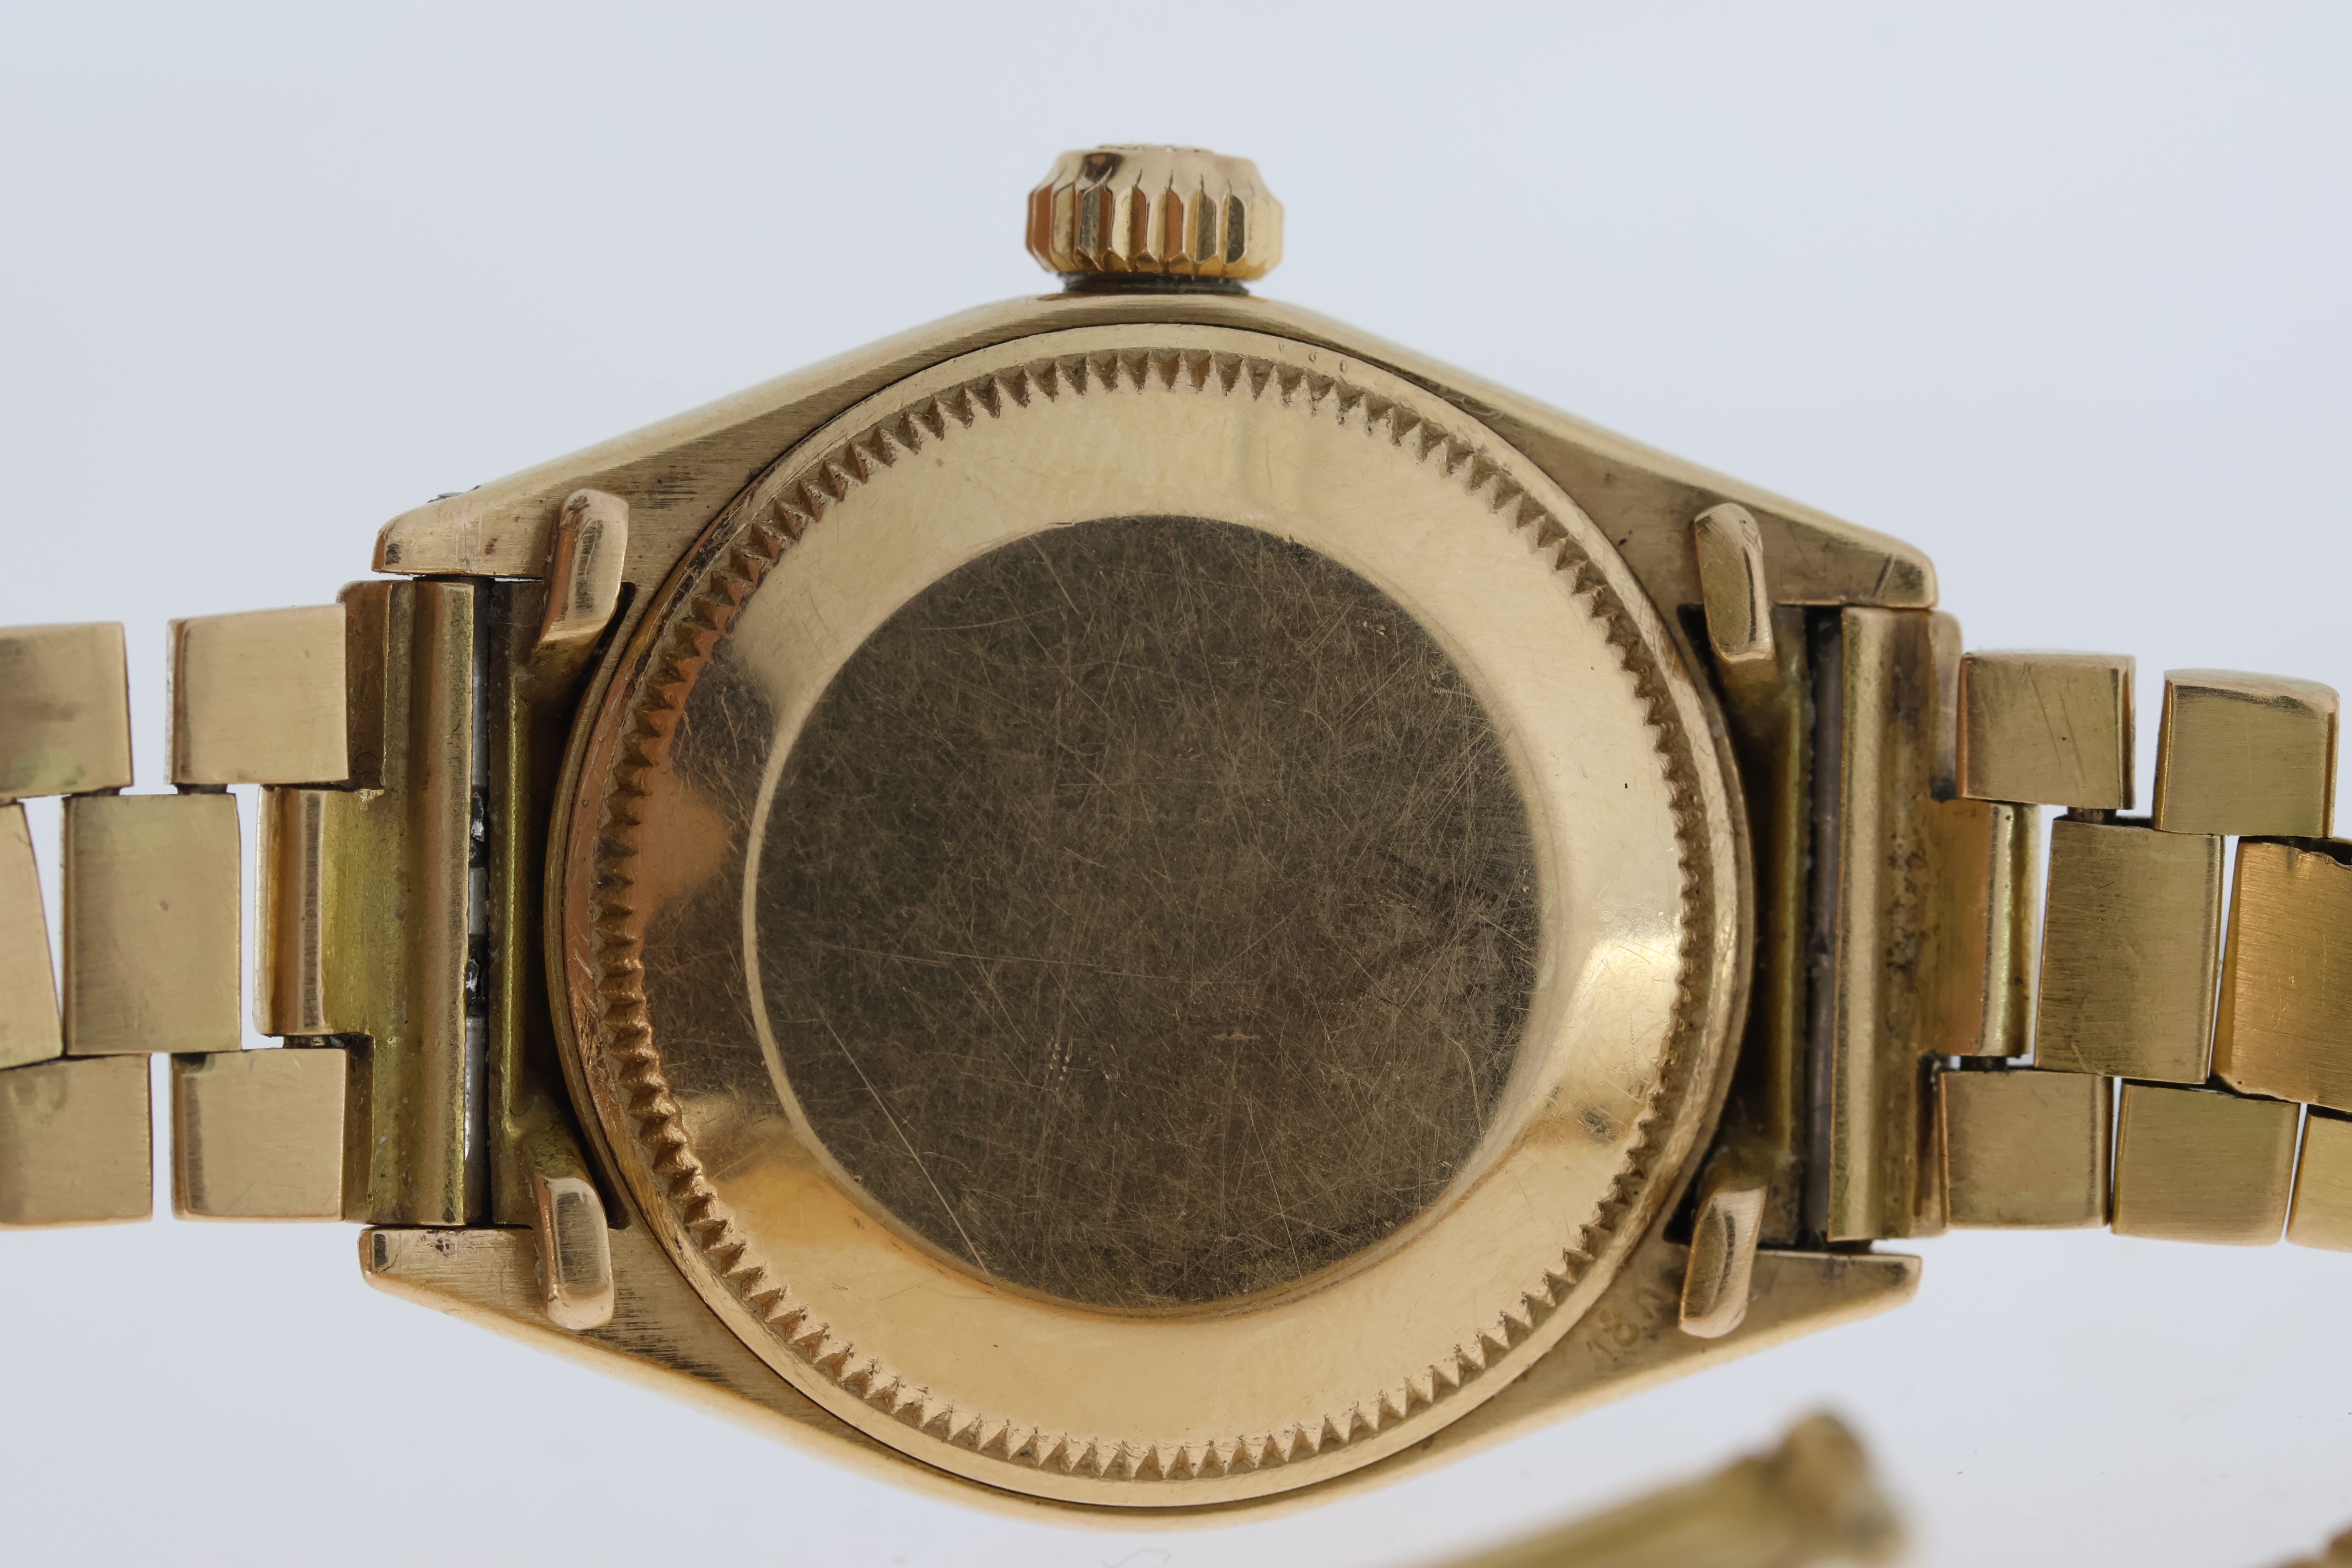 Rolex 18ct Datejust 26 Reference 6917 Circa 1974 - Image 3 of 3